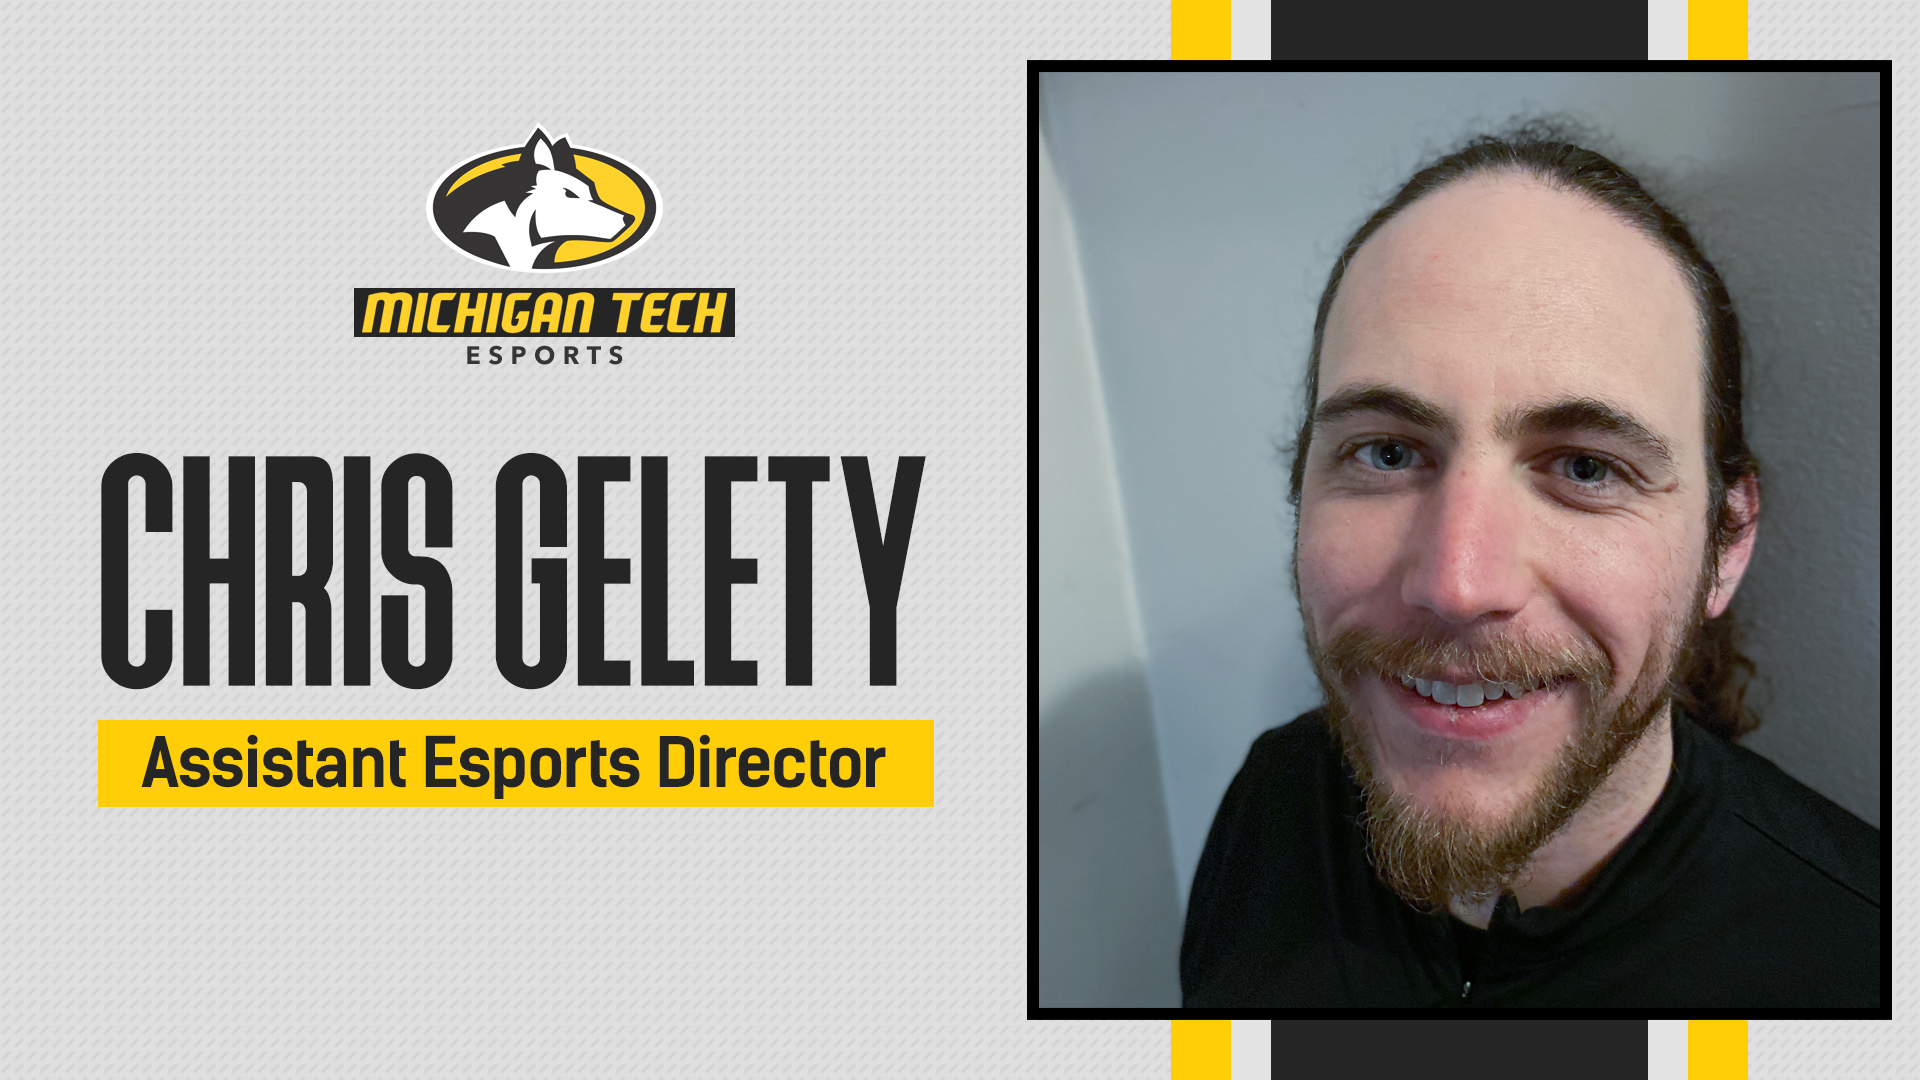 Gelety hired as Assistant Director of Esports